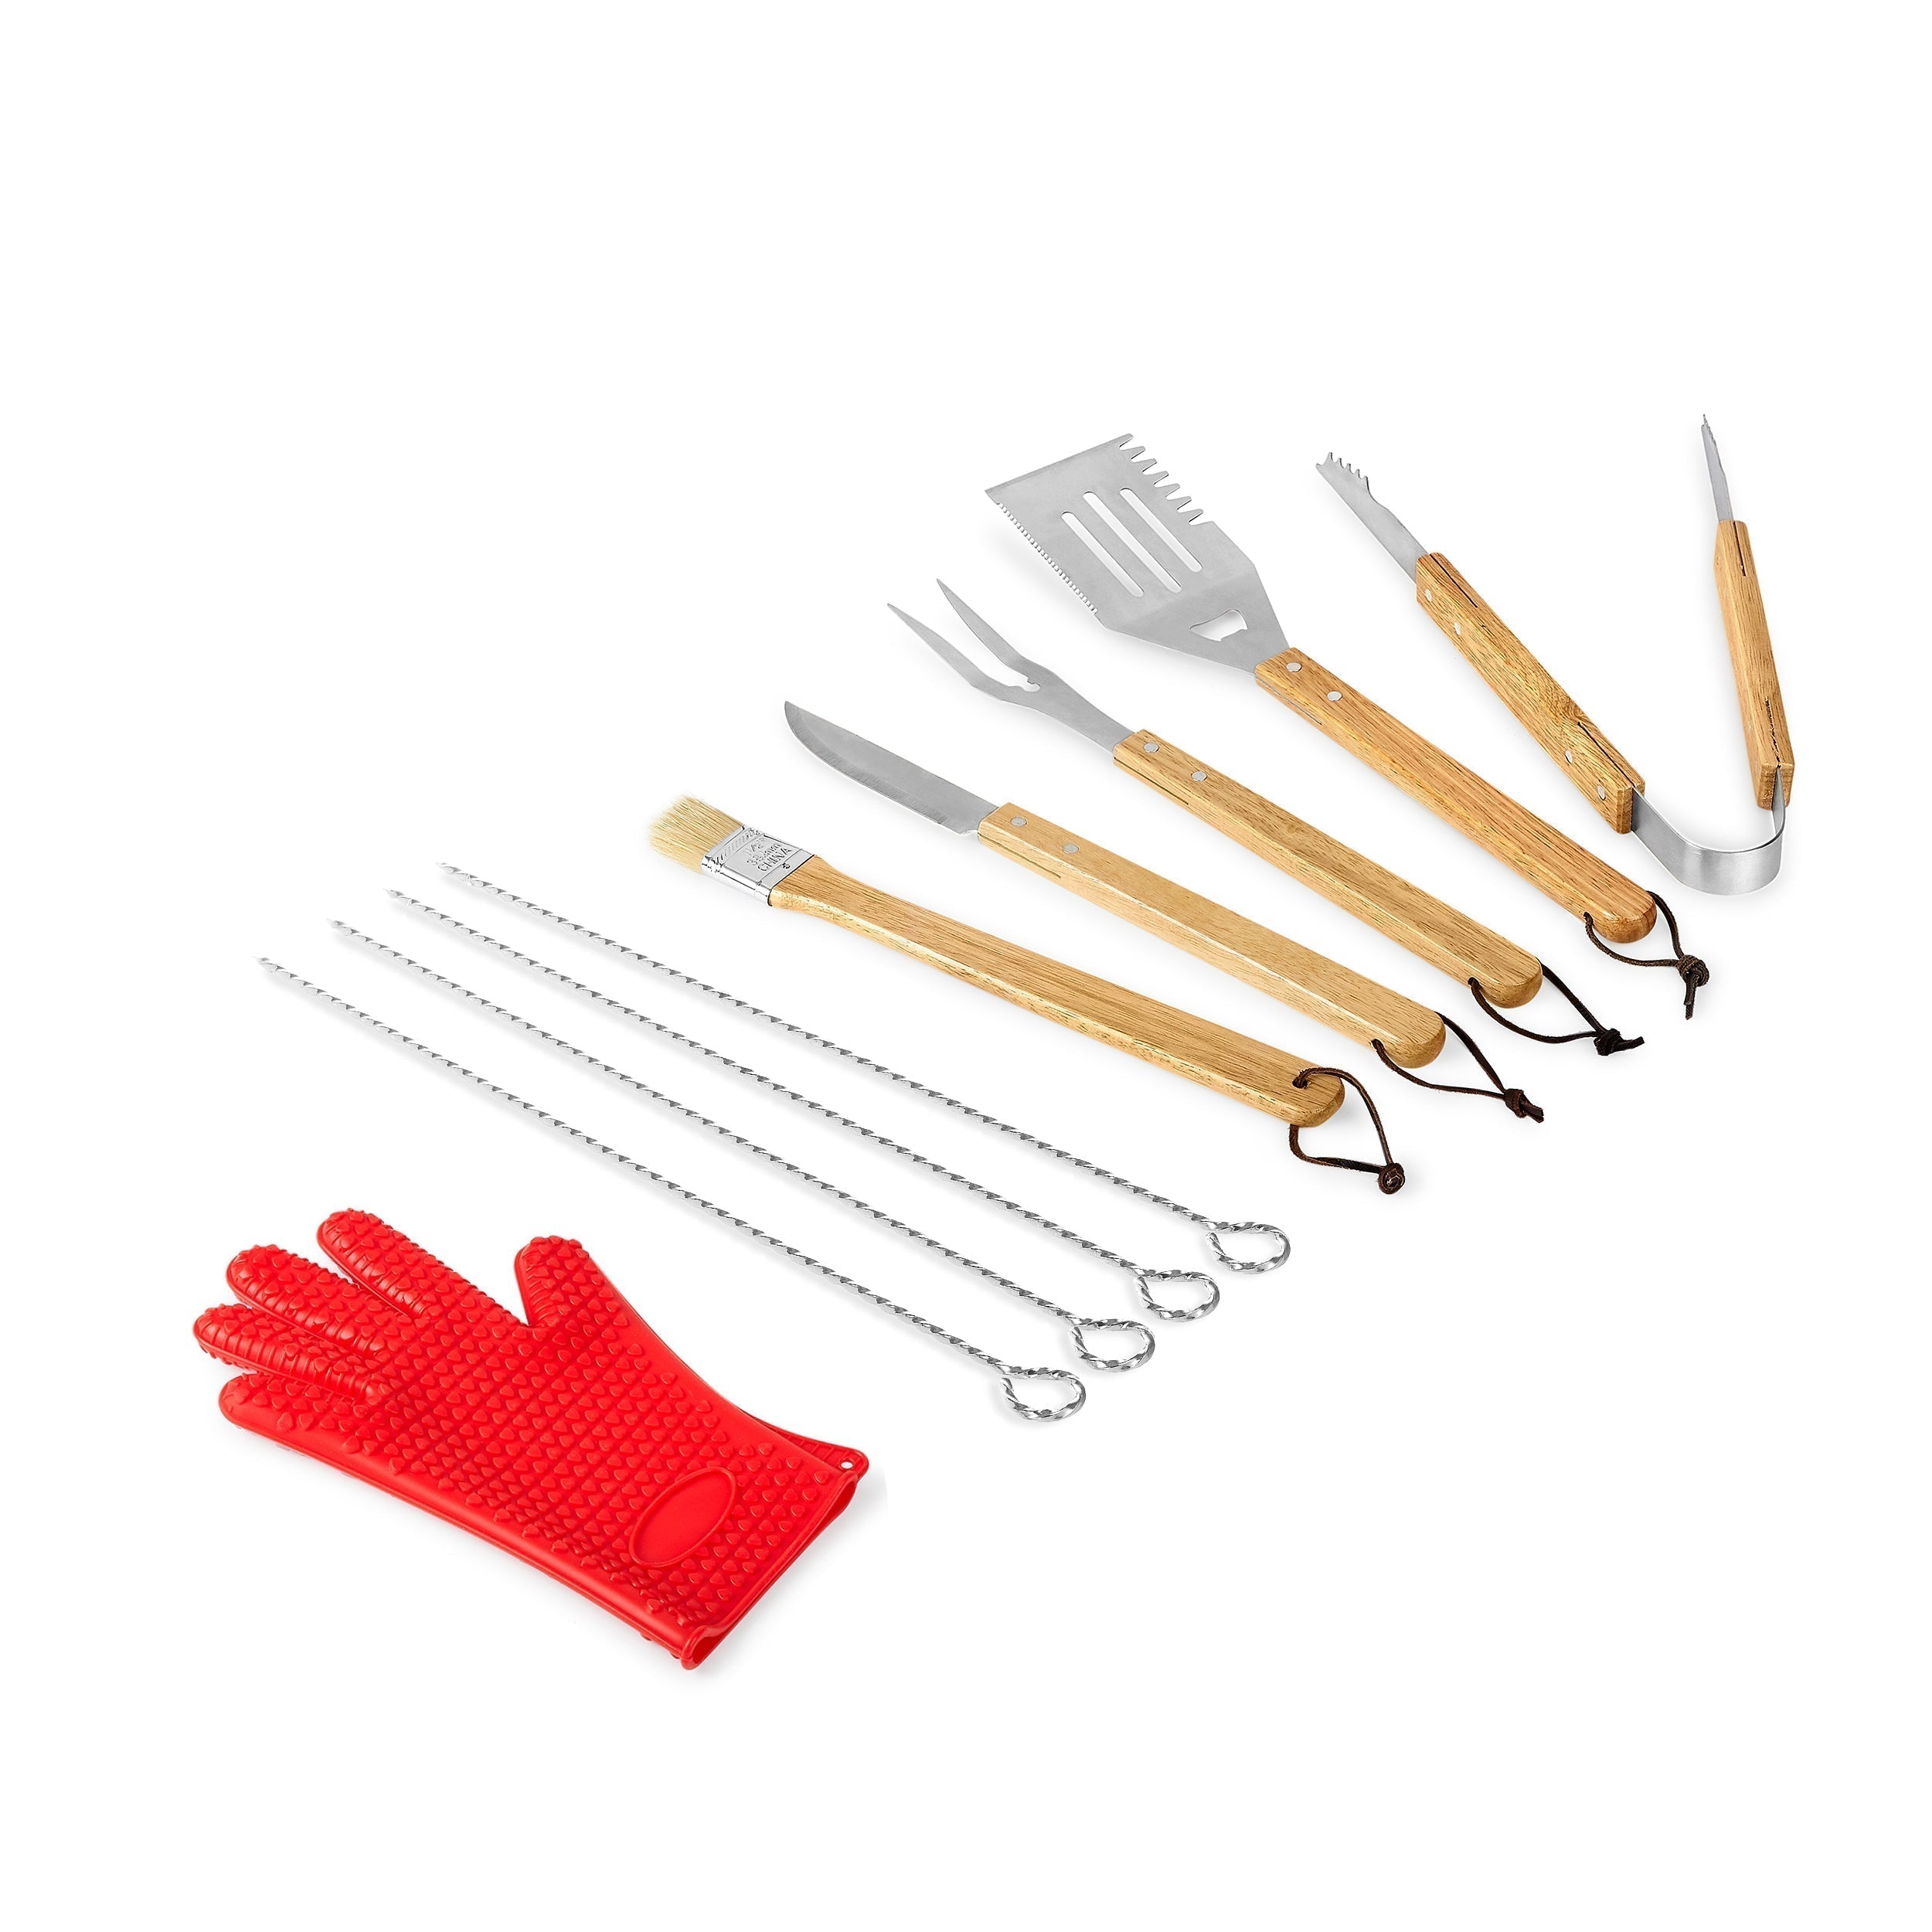 11 Piece BBQ Grill Set - The Grillfather